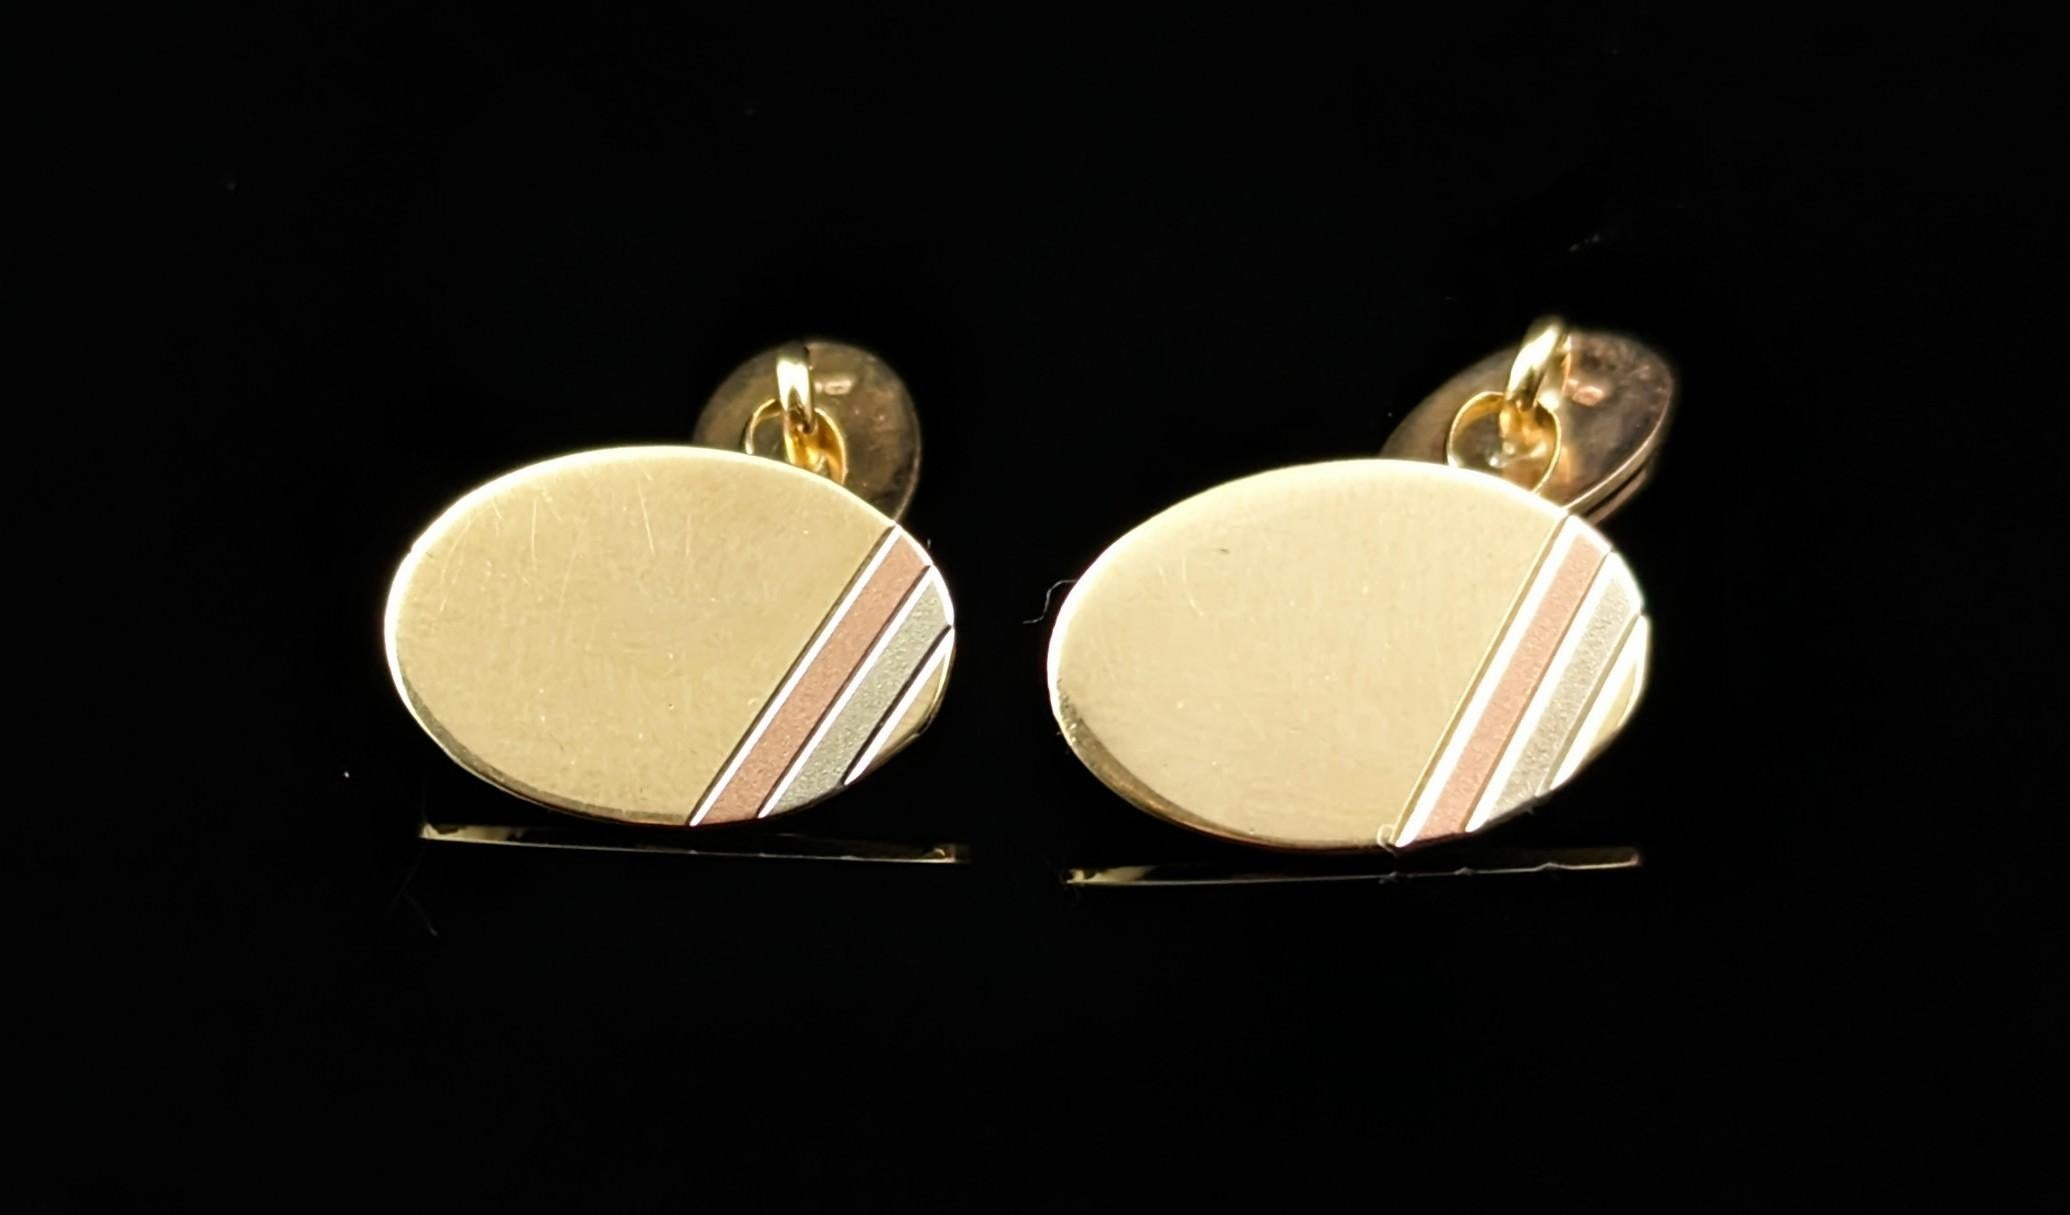 A Very attractive pair of Vintage 9ct gold cufflinks.

Oval shape cufflinks with a stylish engraved corner design with a tri colour gold banding of rose, white and yellow gold, the majority of the oval being a rich high polished yellow gold.

They